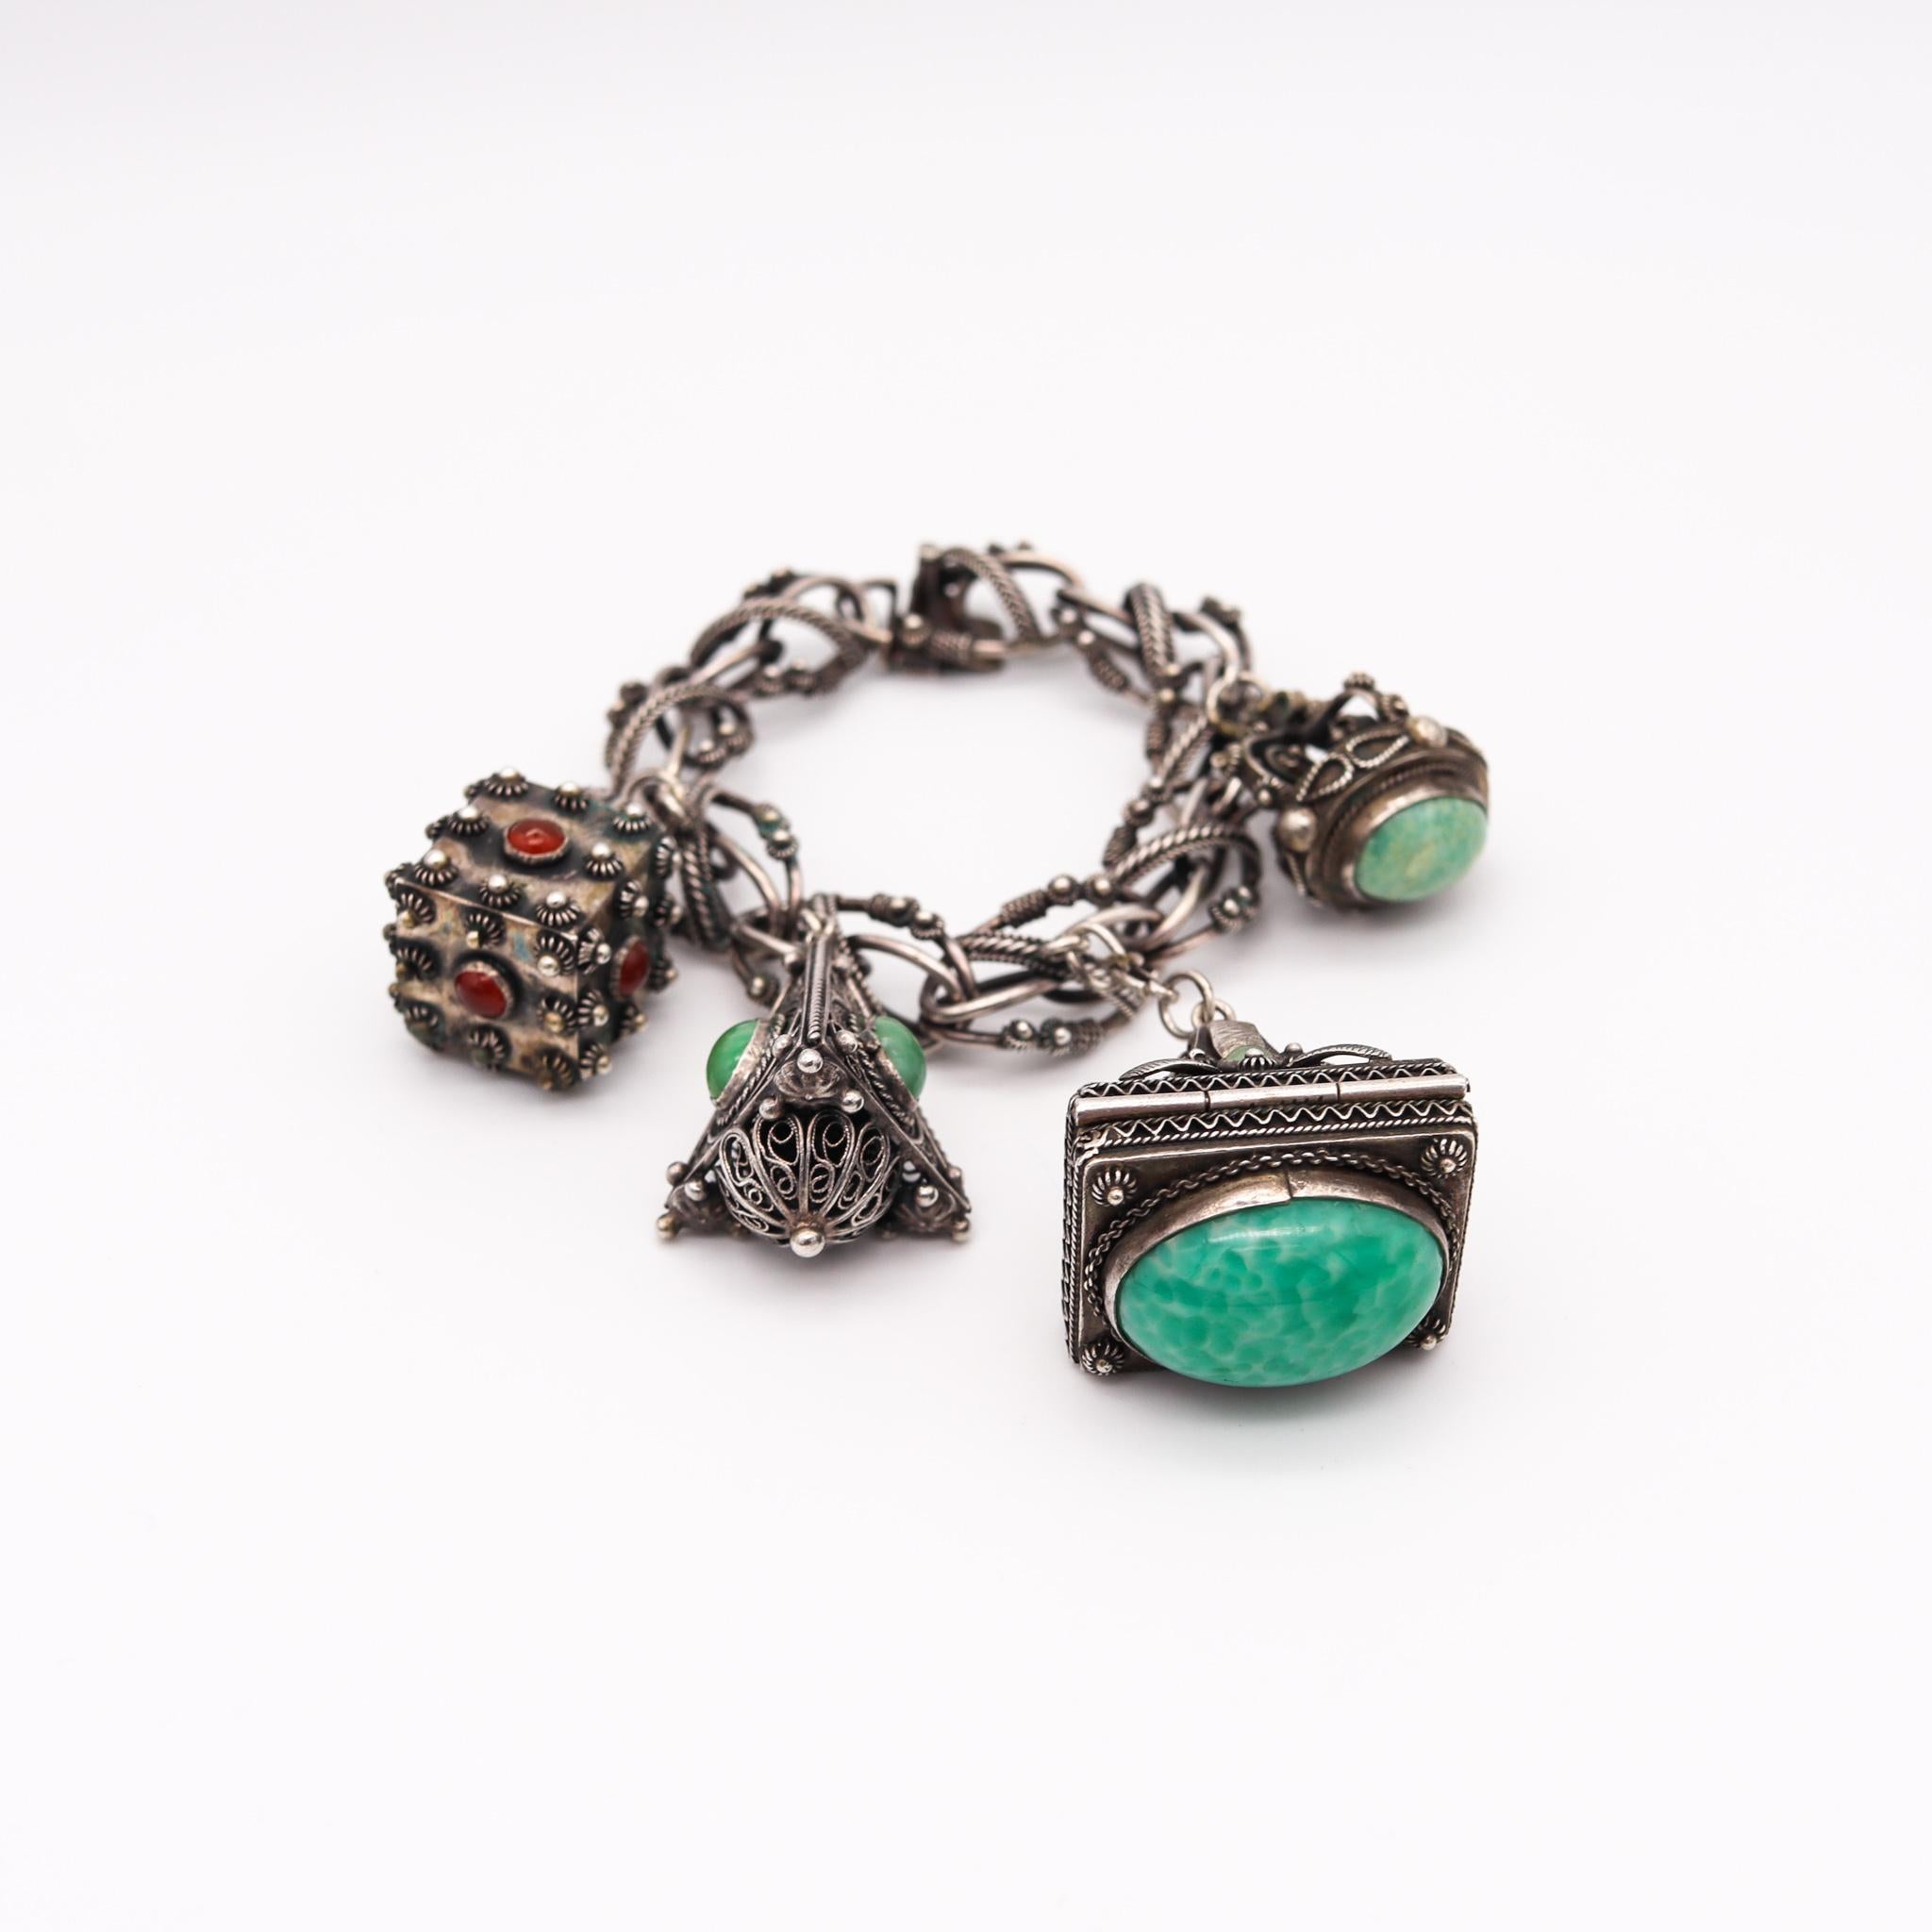 An Etruscan revival gypsy charms bracelet.

An oversized charms bracelet made in Italy, back in the 1930. This gypsy bracelet has been crafted with Etruscan revival patterns in solid .800/.999 silver with highly textured elements. Fitted with a